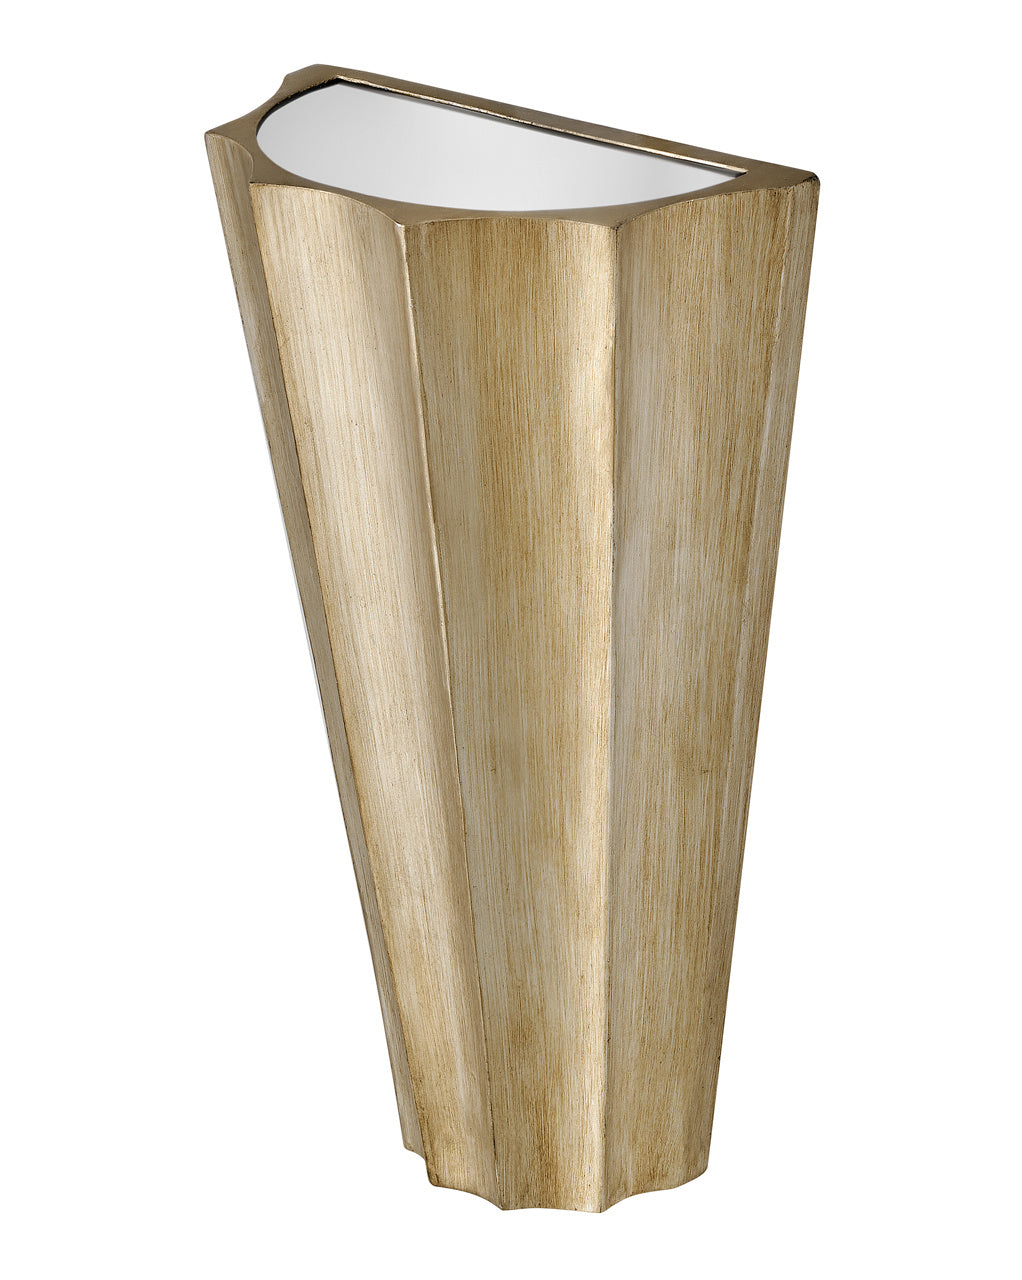 Gia LED Wall Sconce in Champagne Gold by Hinkley Lighting